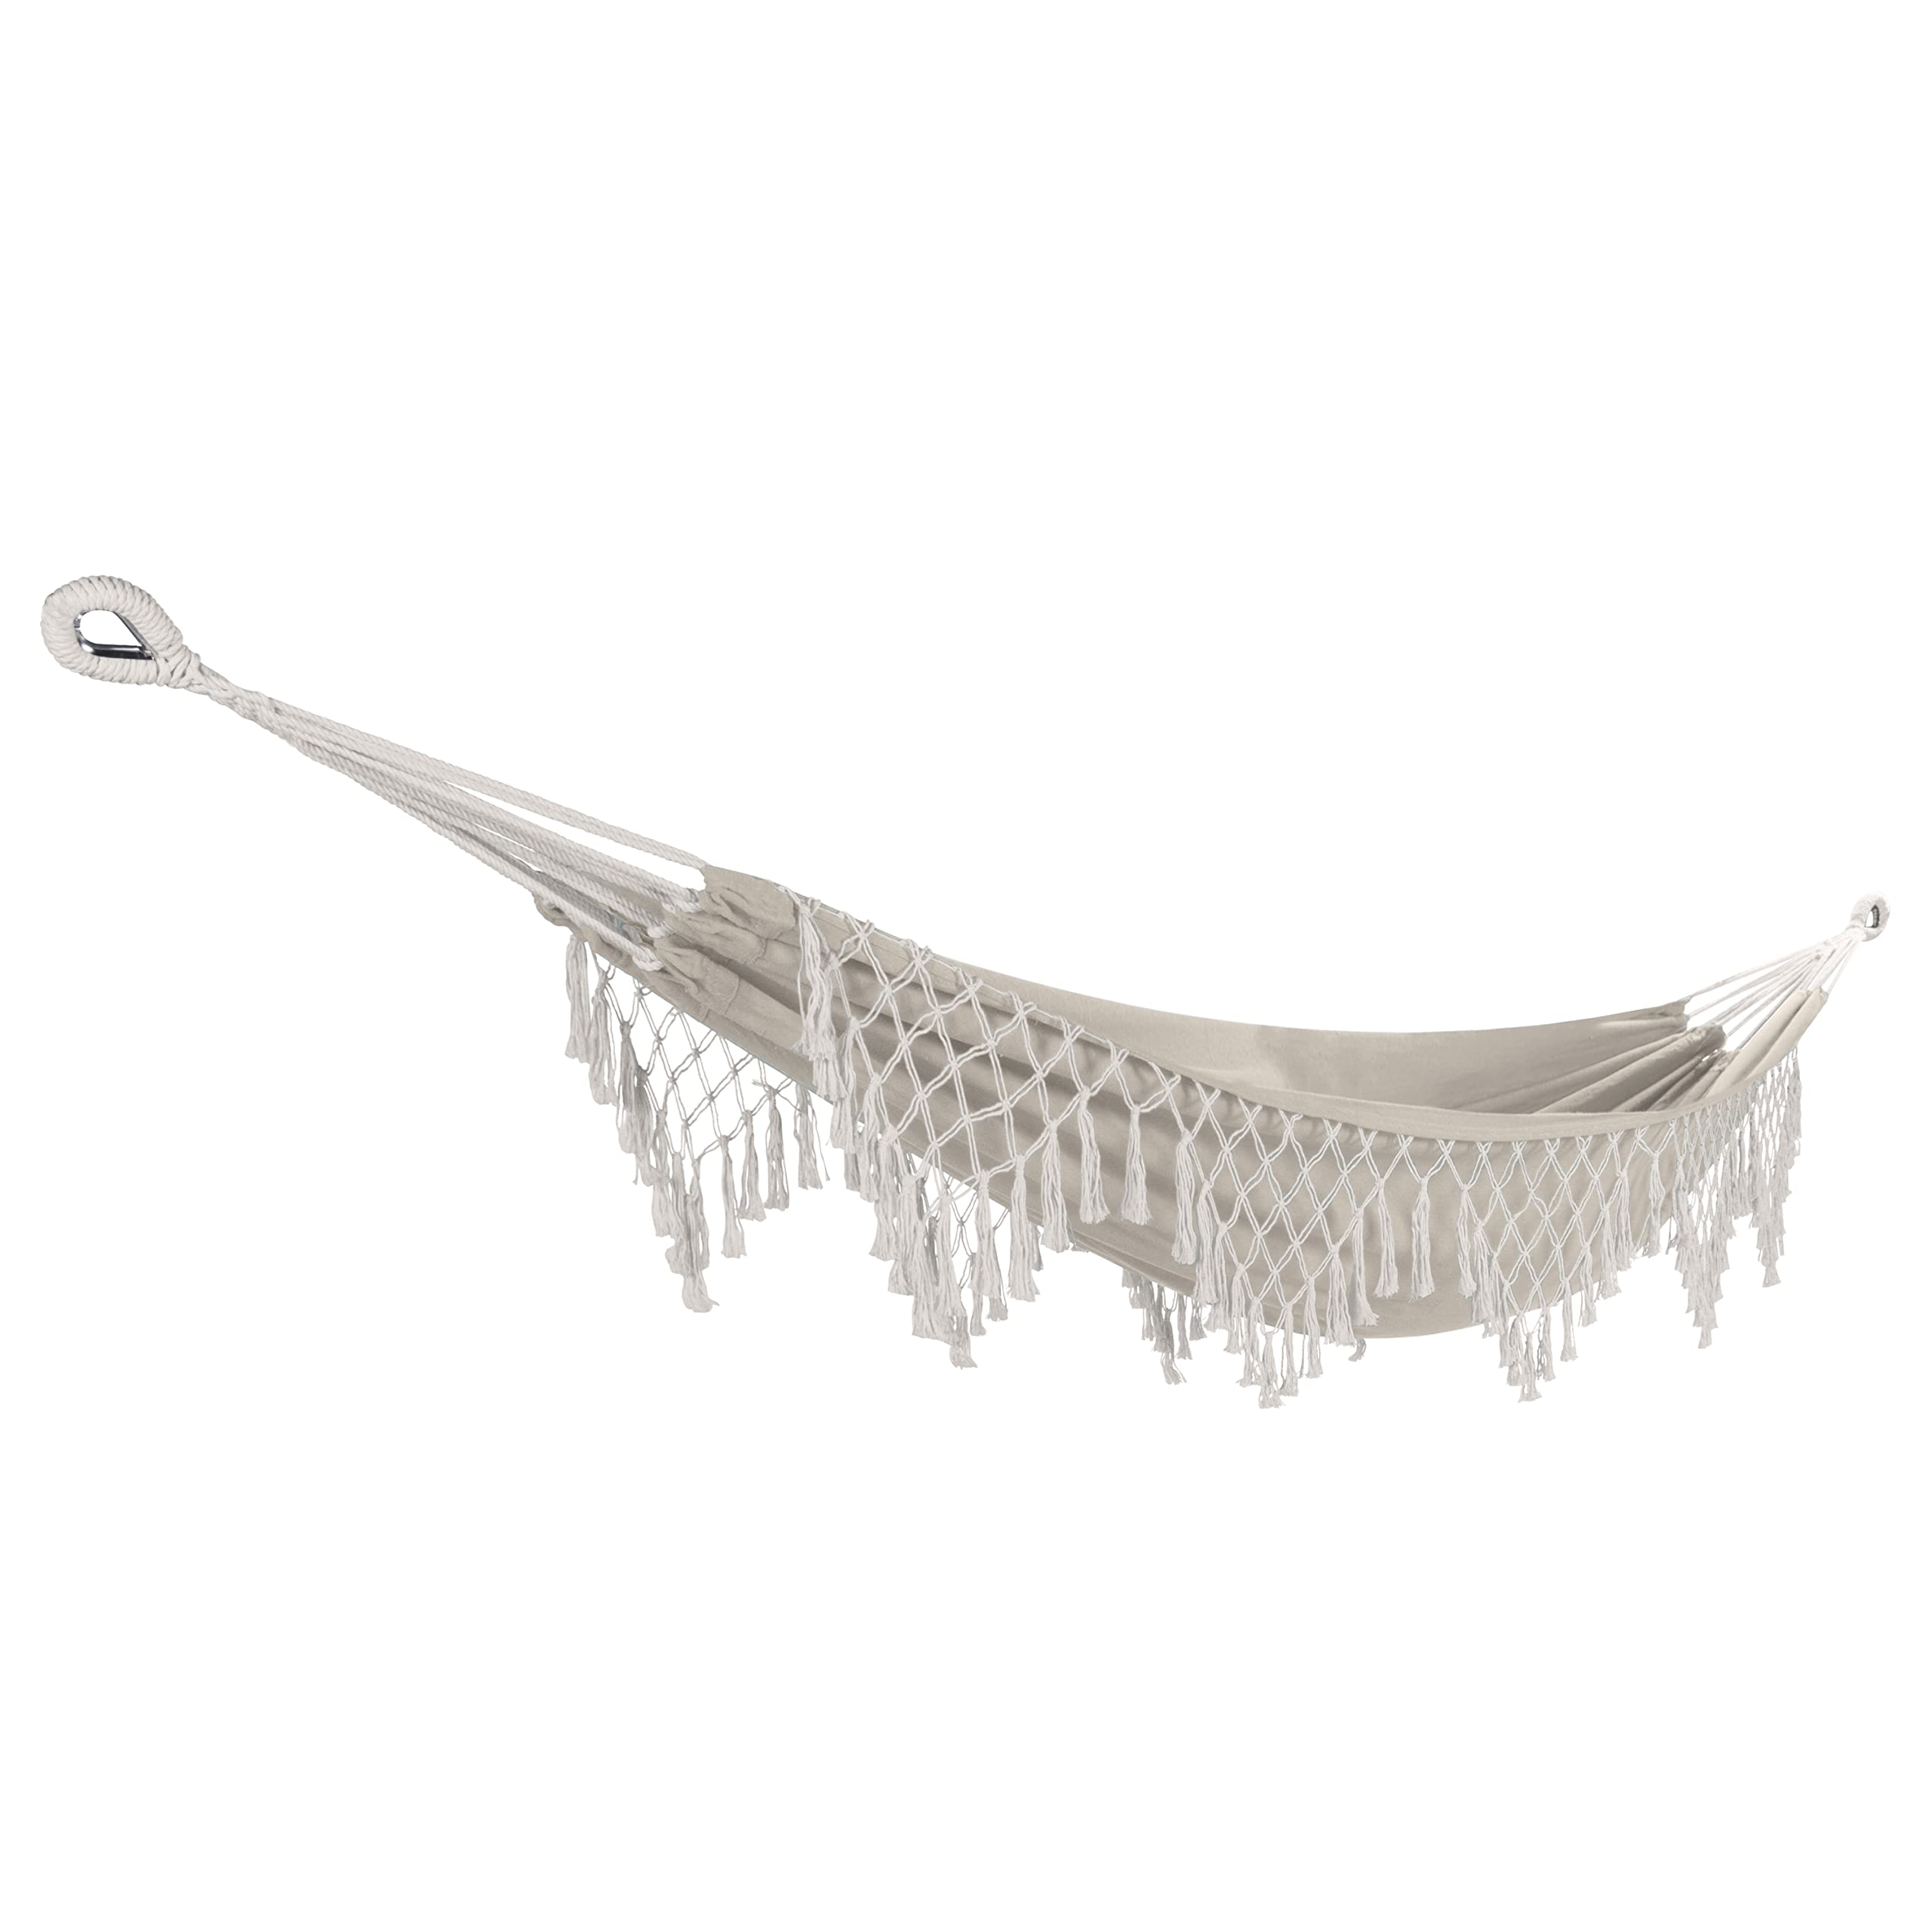 Bliss Hammocks Hand-Braided Hammock in a Bag w/ Decorative Fringe (Natural Brown) $9.98 + Free Shipping w/ Prime or on $35+